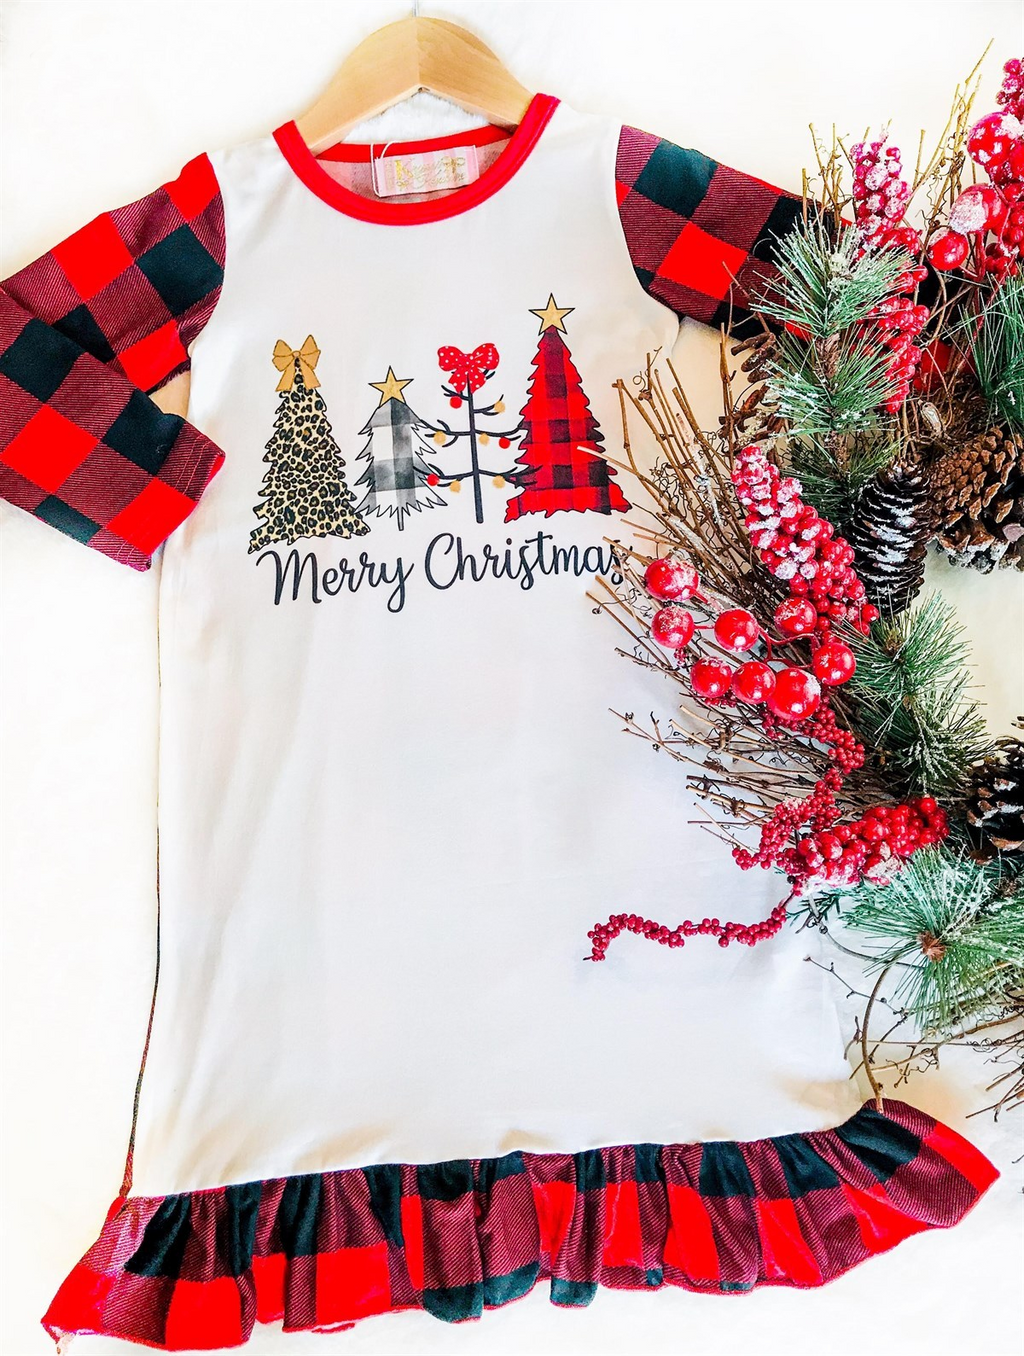 Girls Christmas Night Gowns - Merry Christmas With Trees. Buffalo plaid pattern on sleeves and ruffle detailing at the bottom. 4 style christmas trees on chest including leopard, black check, stick, and buffalo plaid. Complete with Merry Christmas words on chest.